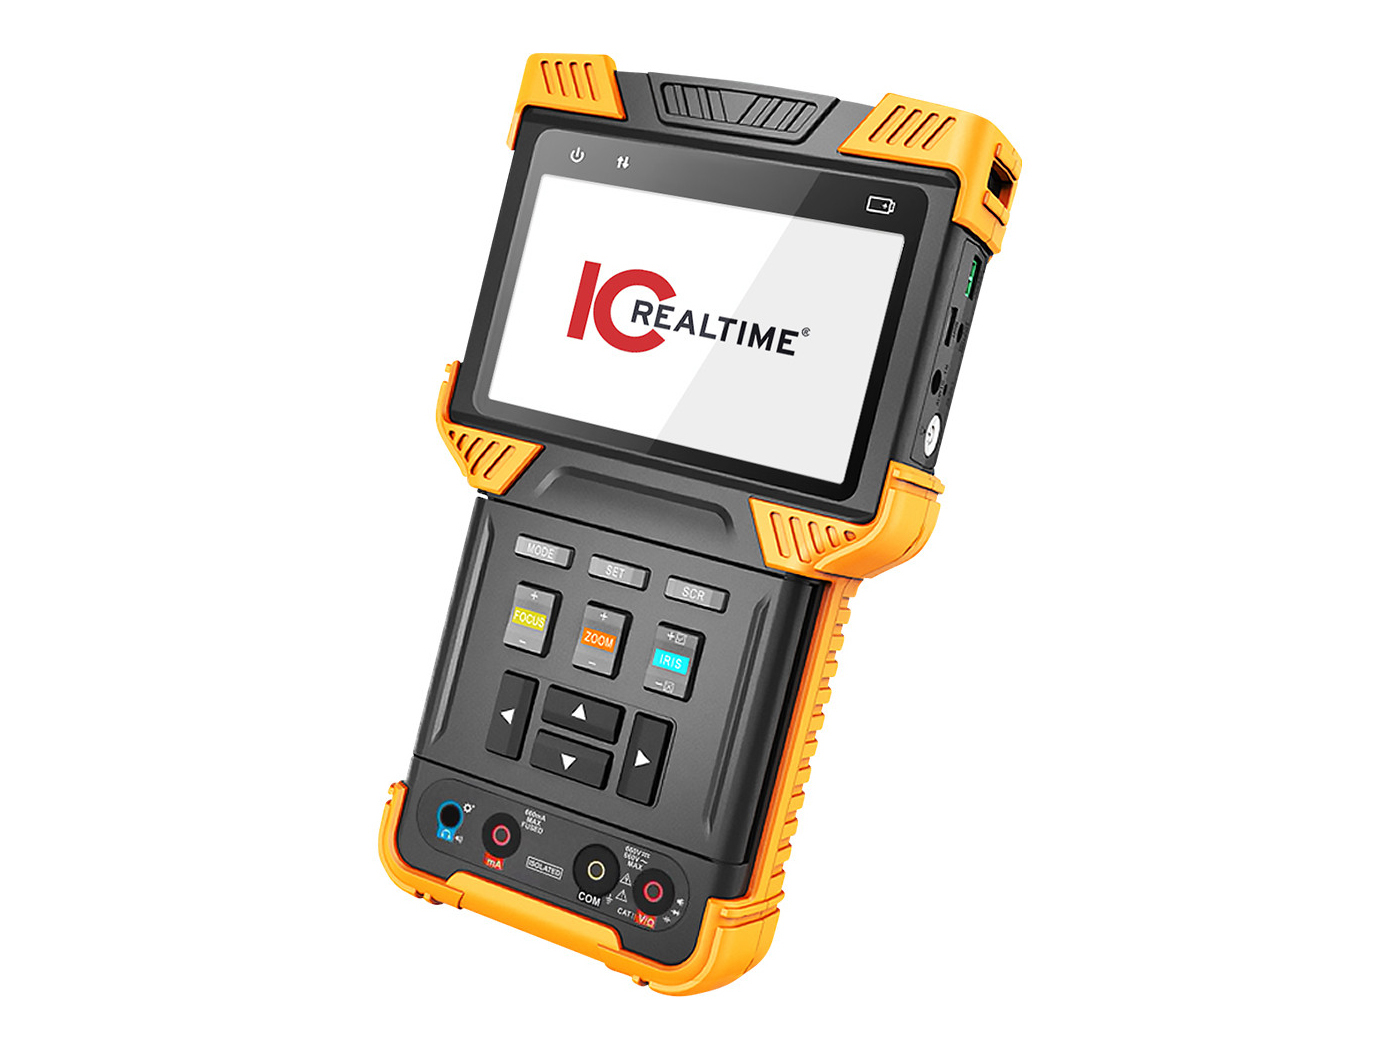 ITM-9000-V3 HD AVS/AHD/TVI/CVBS/IP Supported Multi-Function Test Tool With 4in Screen by ICRealtime